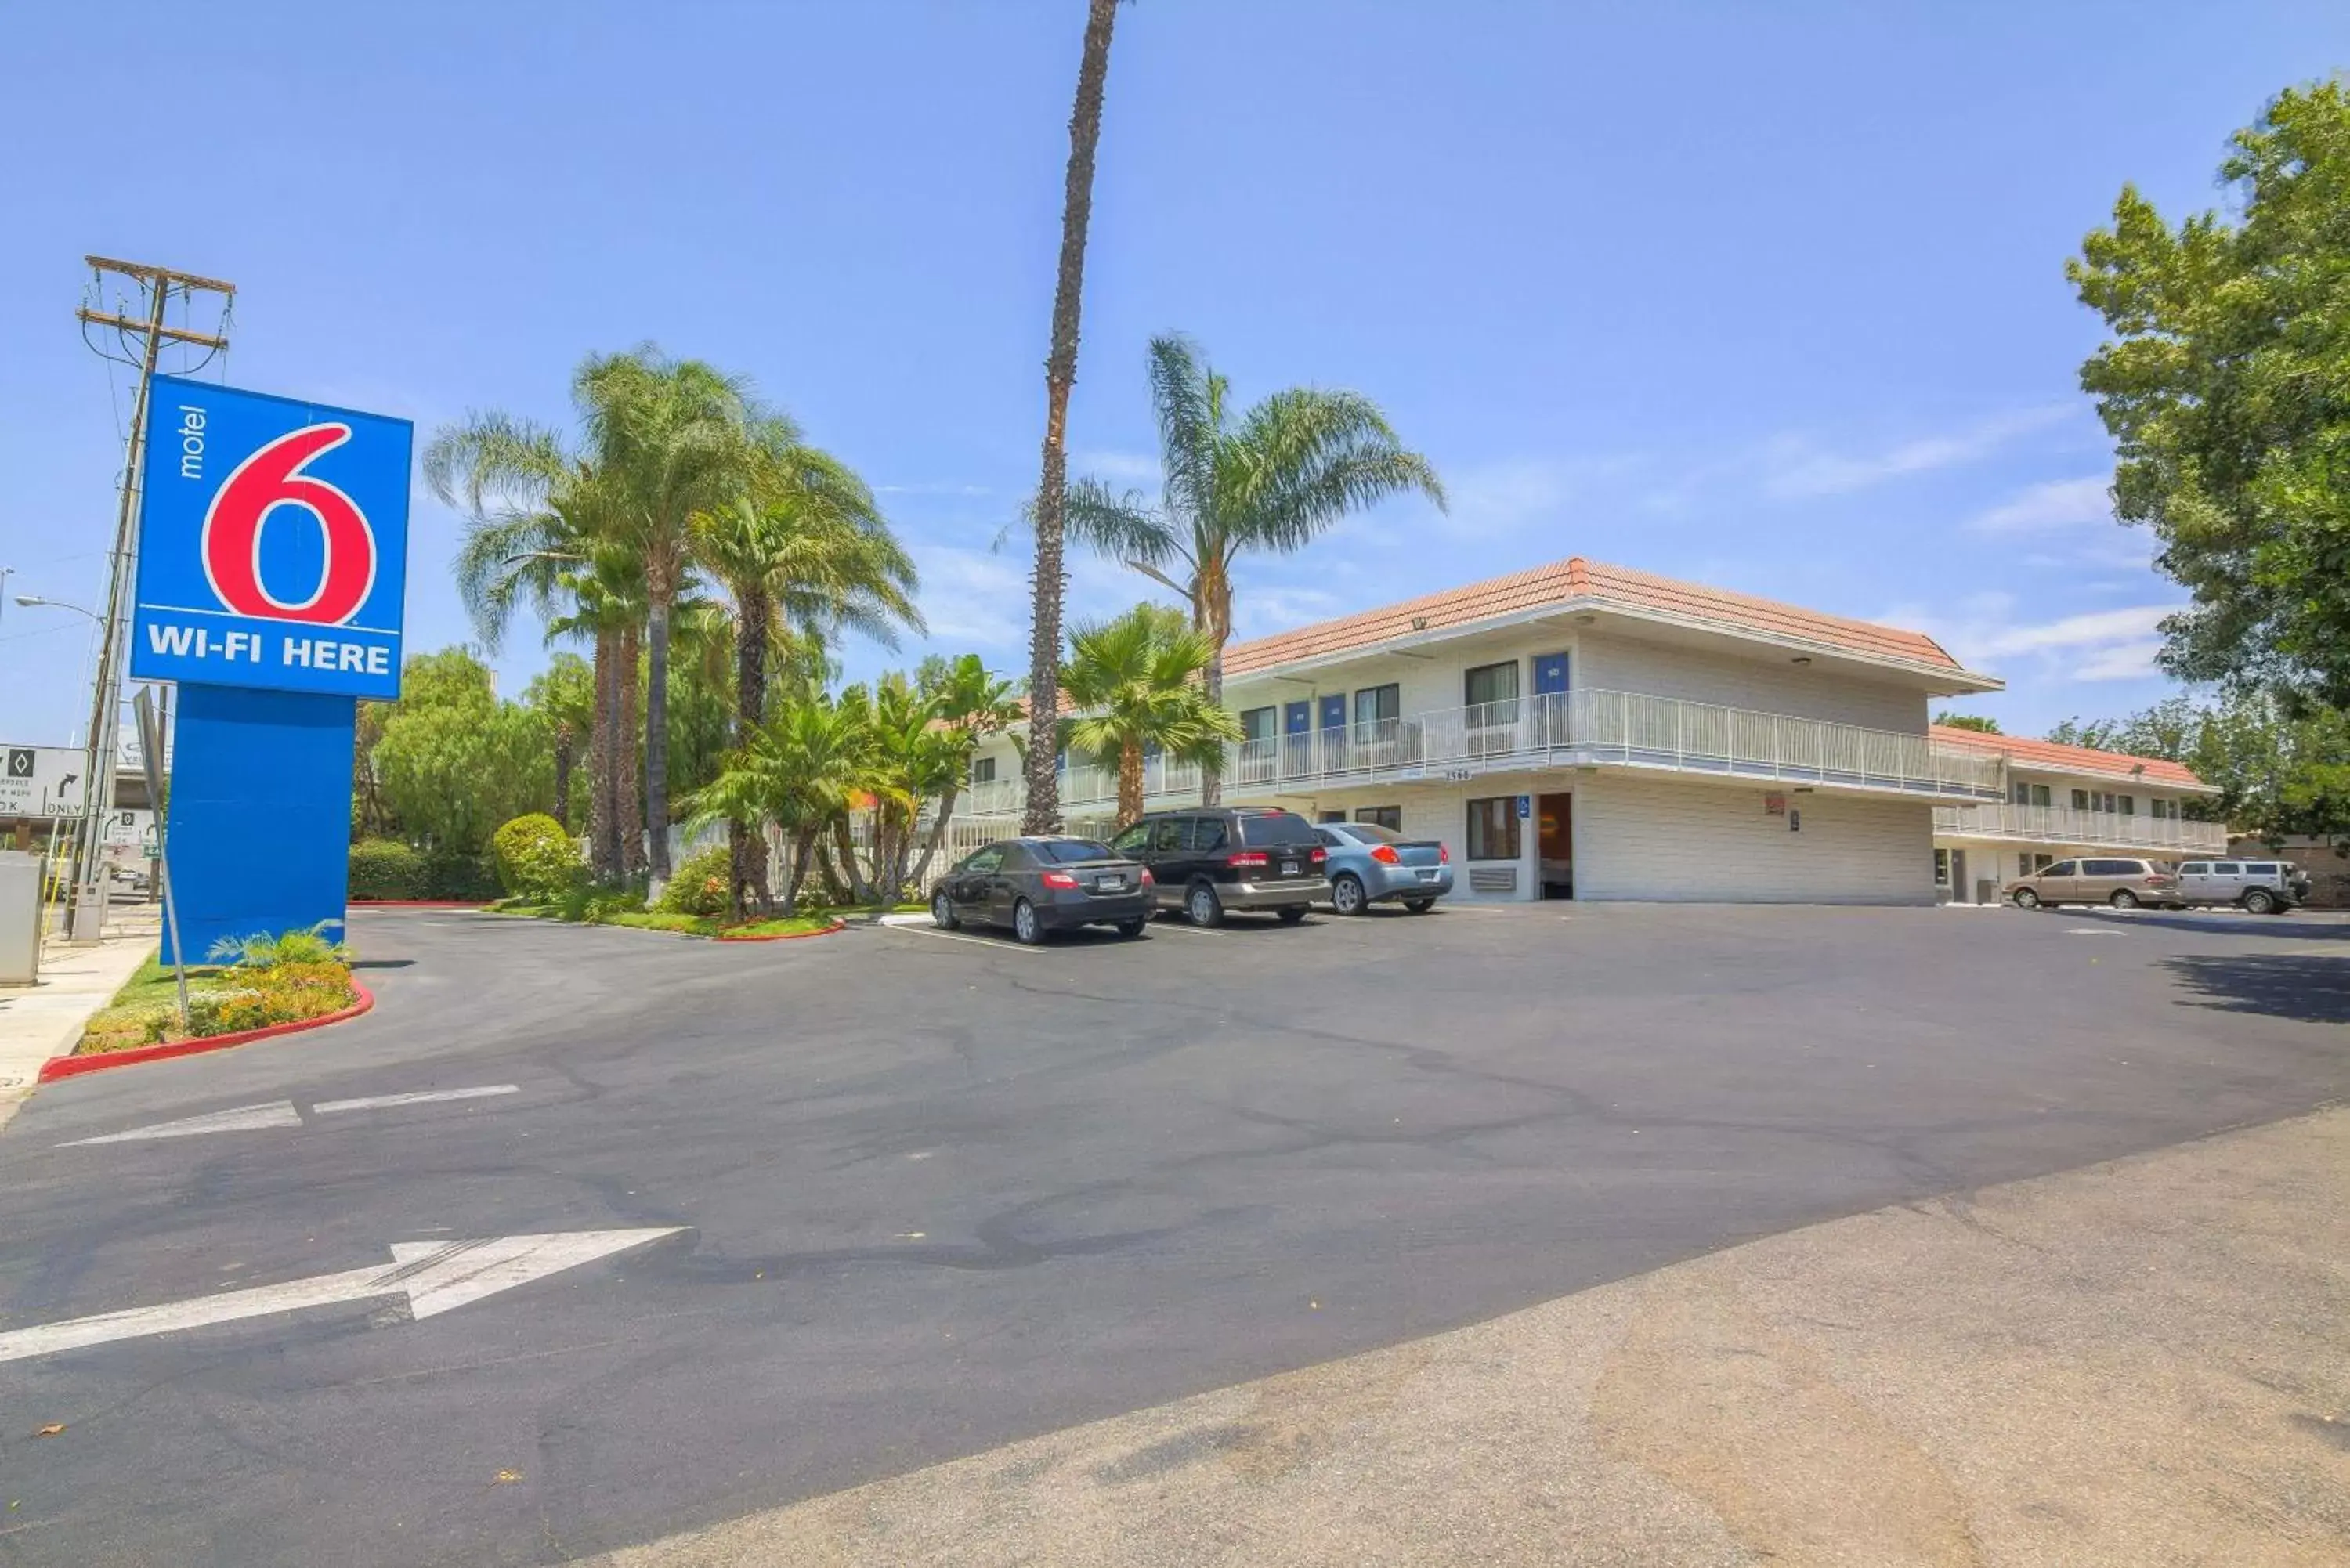 Property building in Motel 6-Simi Valley, CA